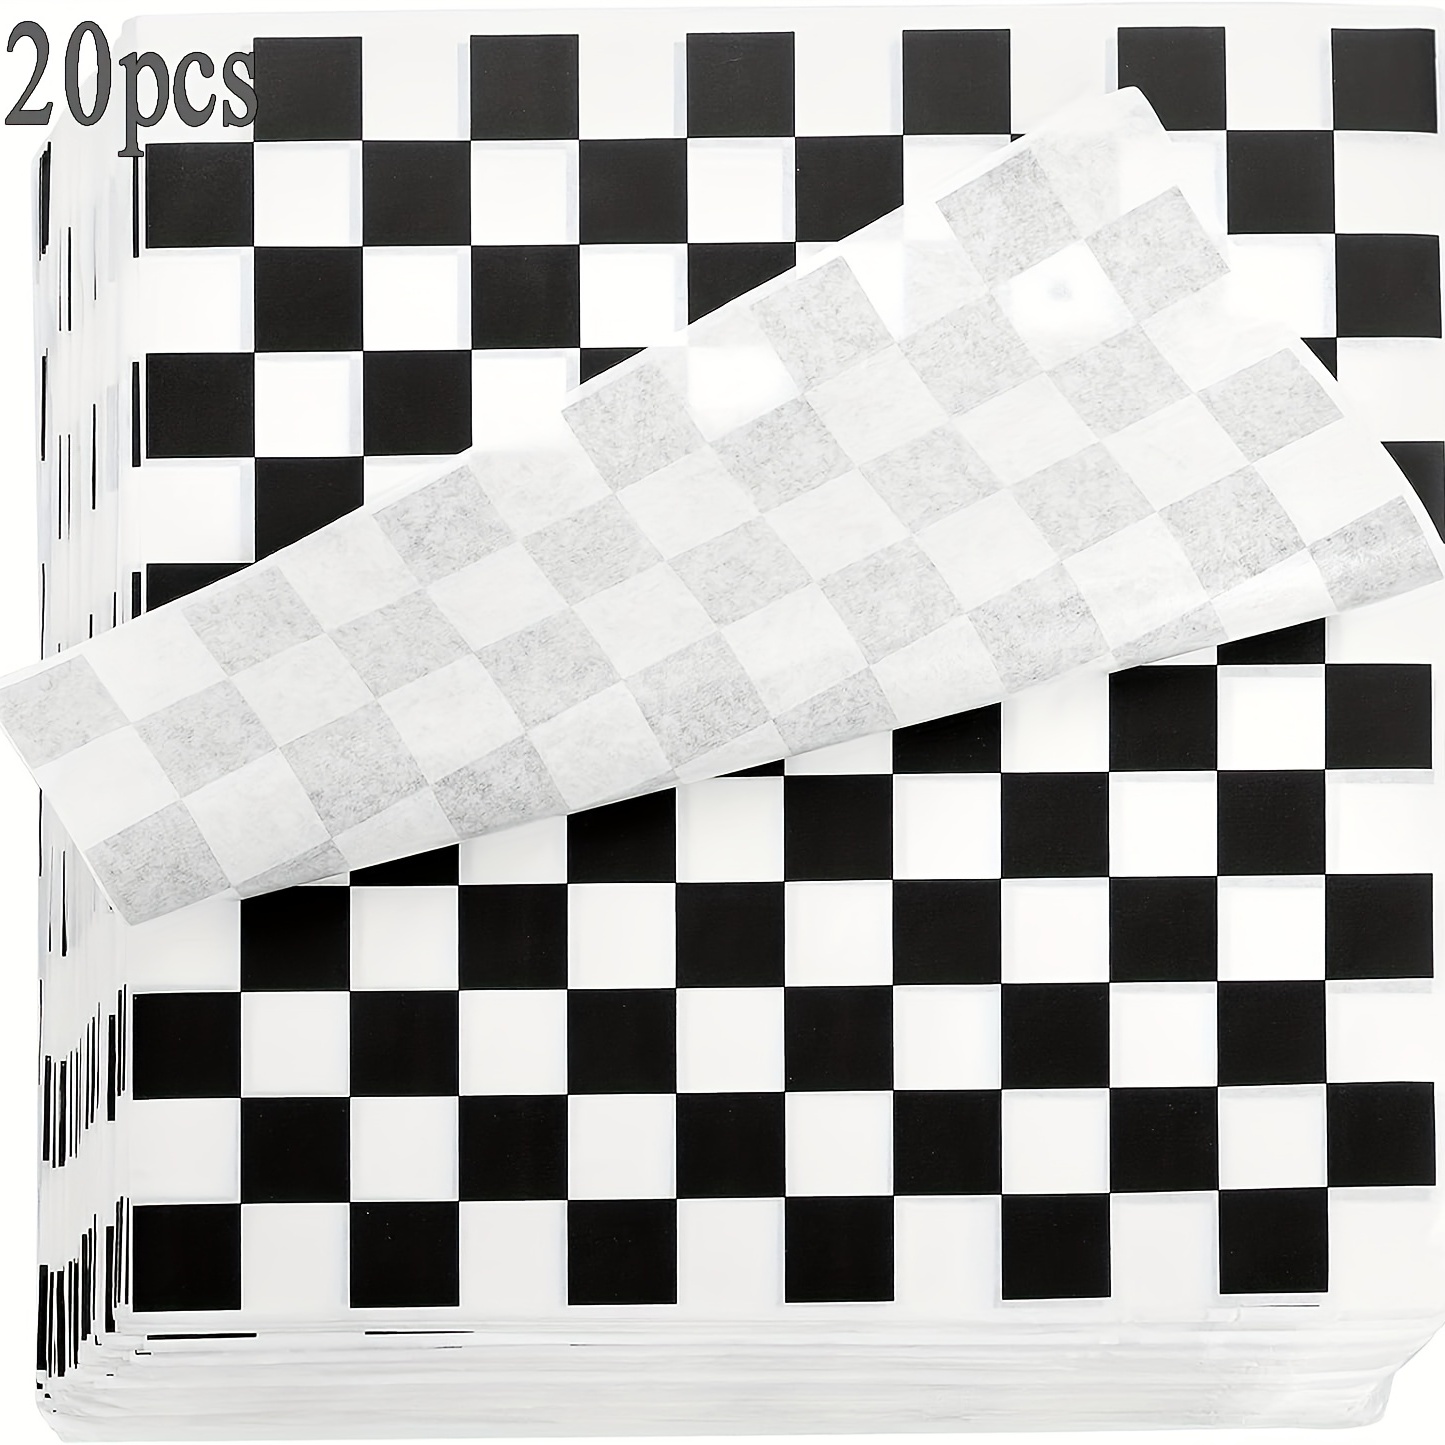 Plate & Pattern 100 Parchment Paper Liners - Classic White